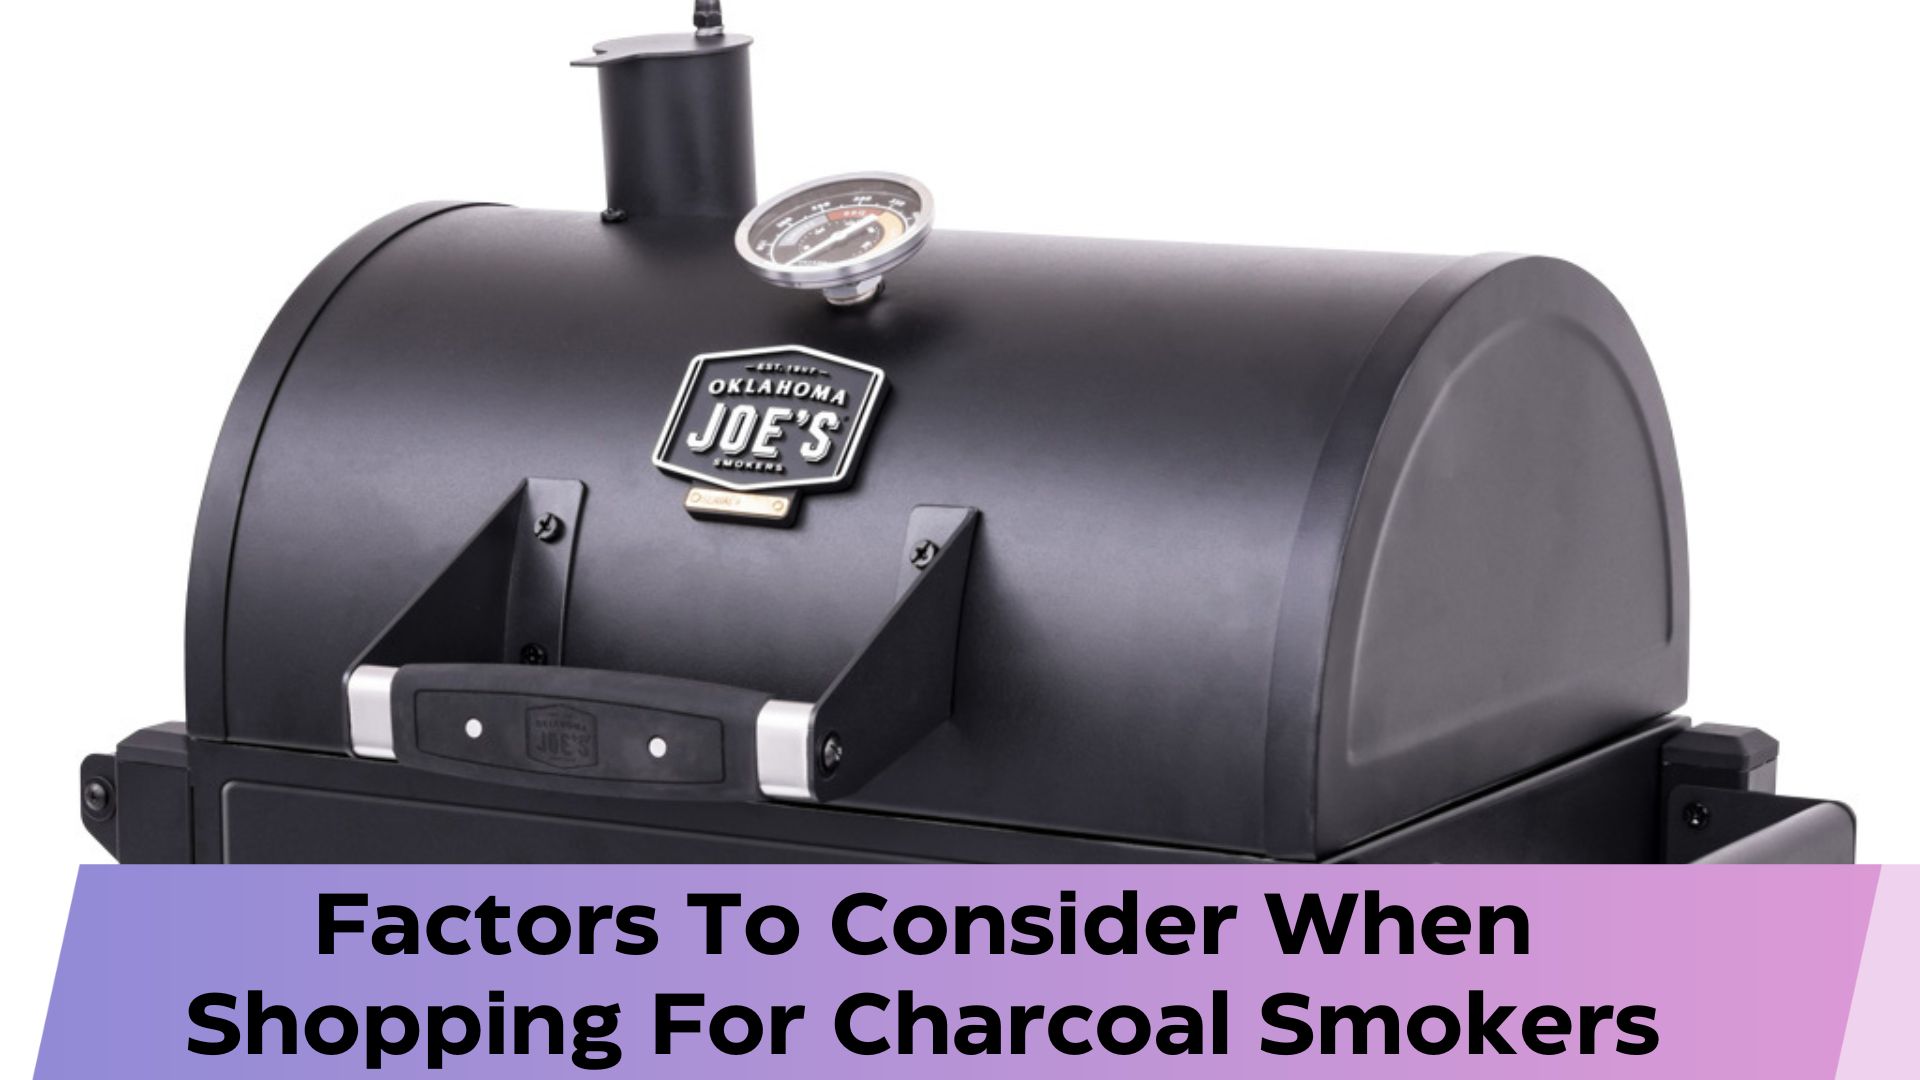 Factors To Consider When Shopping For Charcoal Smokers